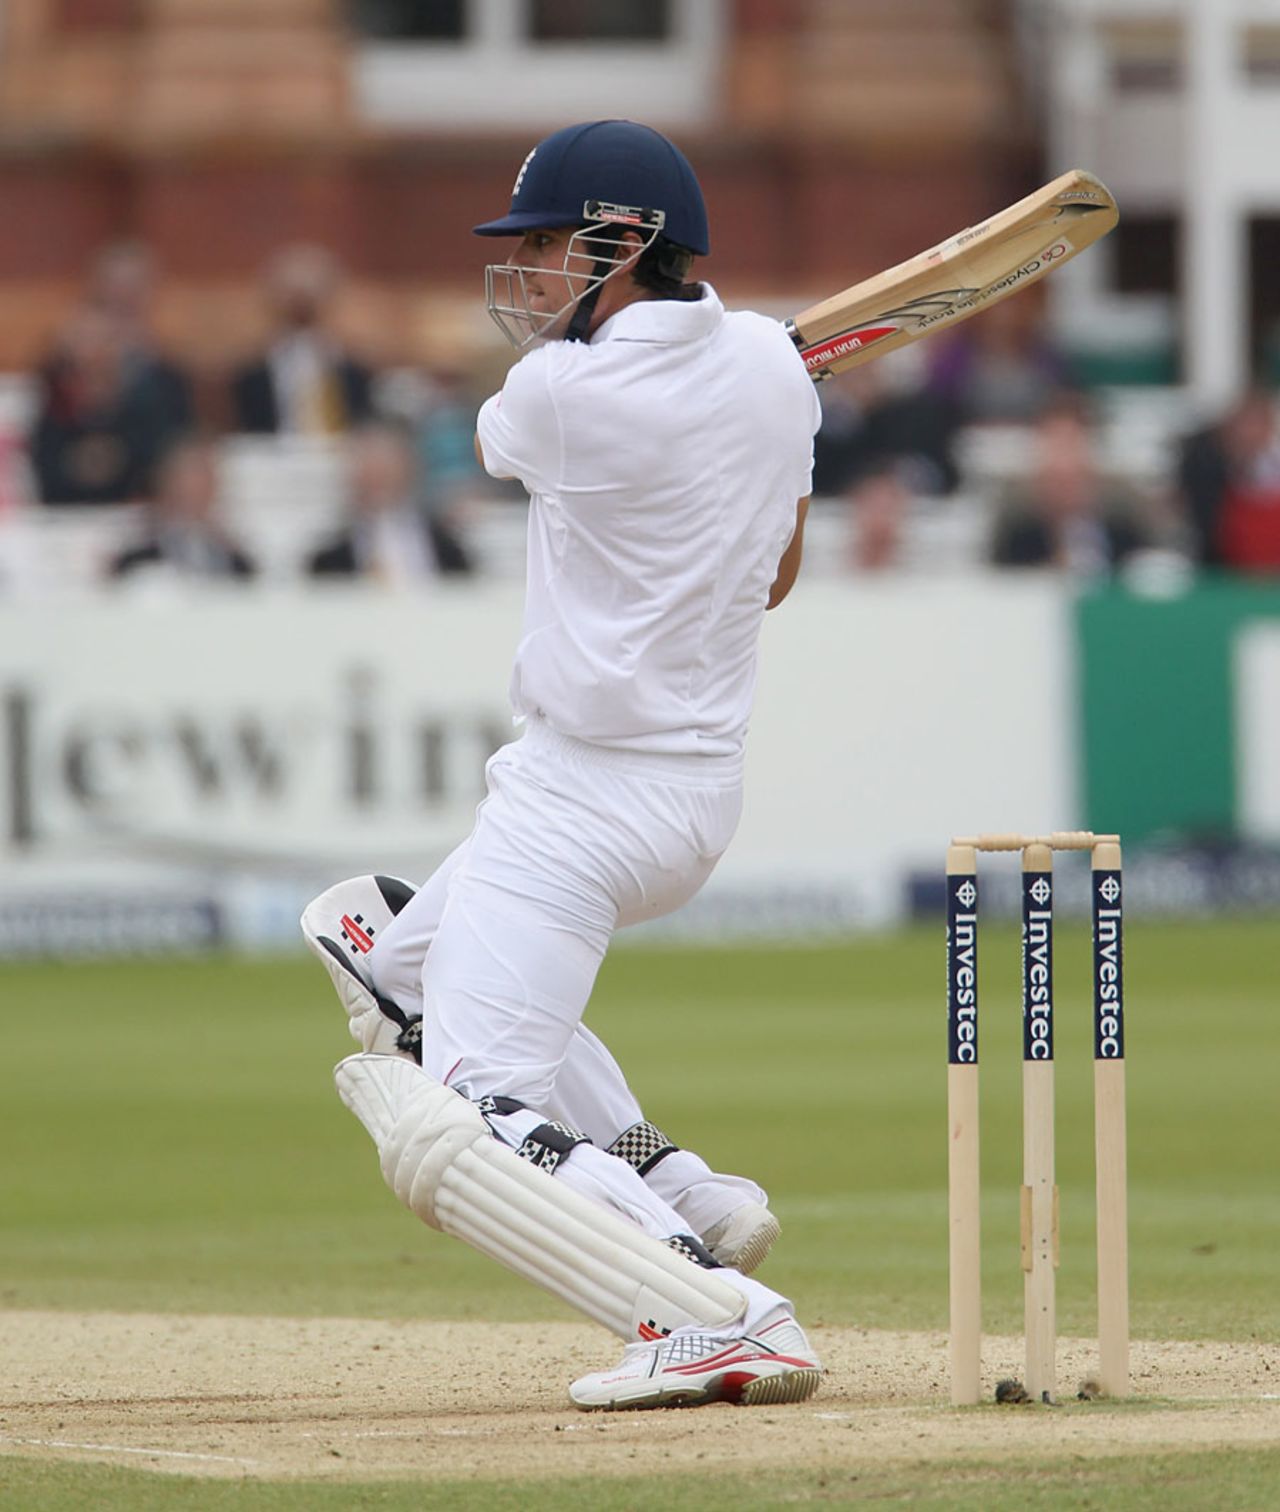 Alastair Cook cuts during his 79, England v West Indies, 1st Test, Lord's, 5th day, May 21, 2012